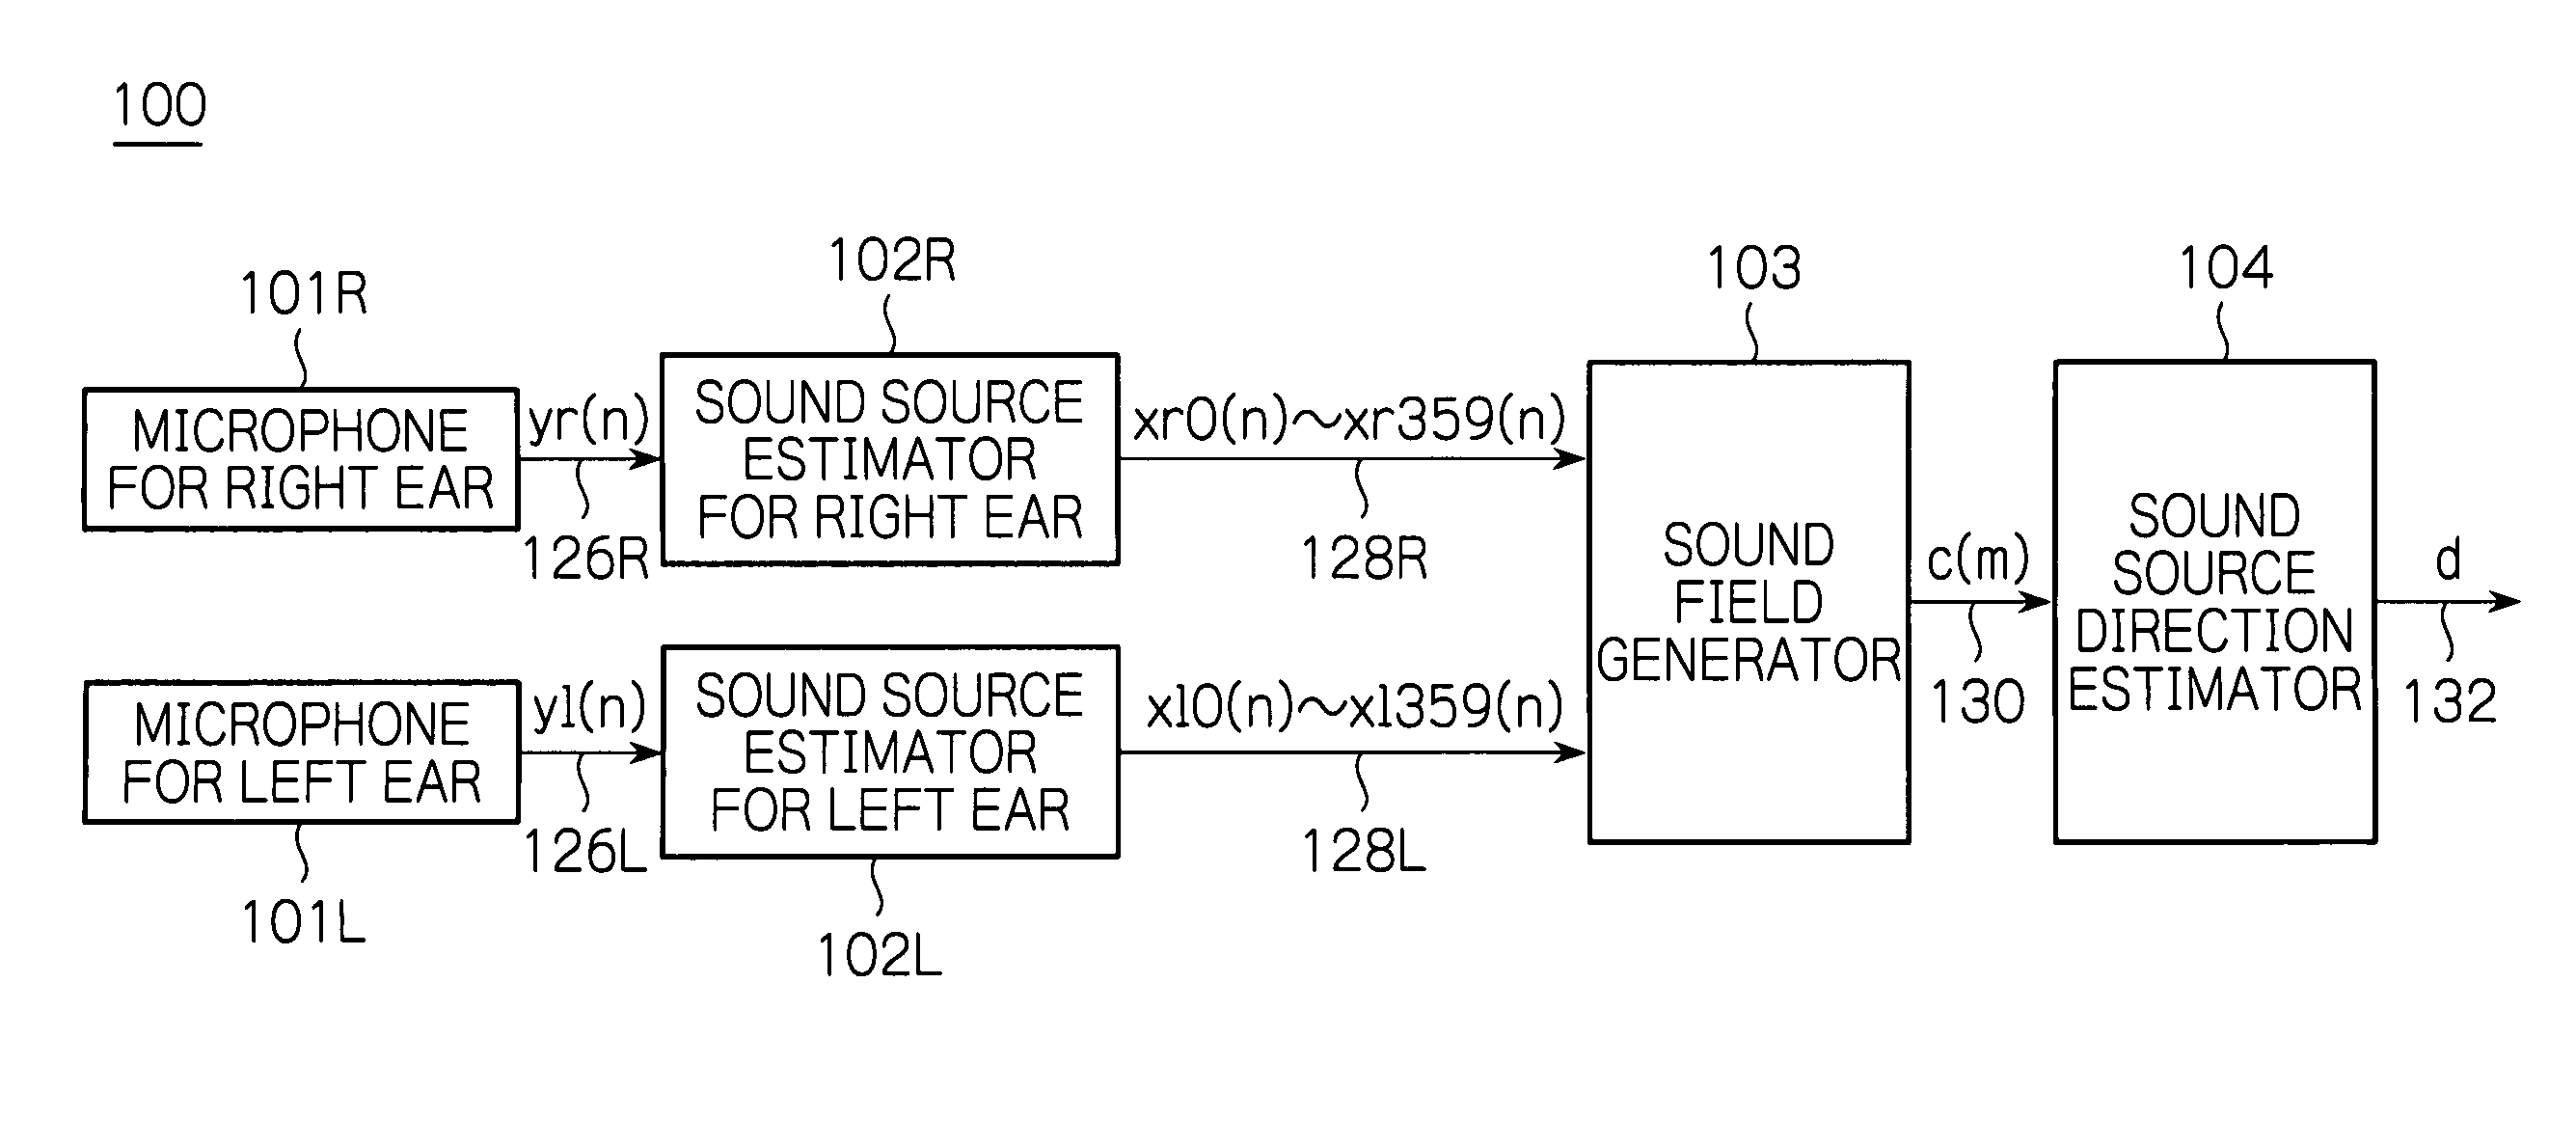 Apparatus for estimating sound source direction from correlation between spatial transfer functions of sound signals on separate channels